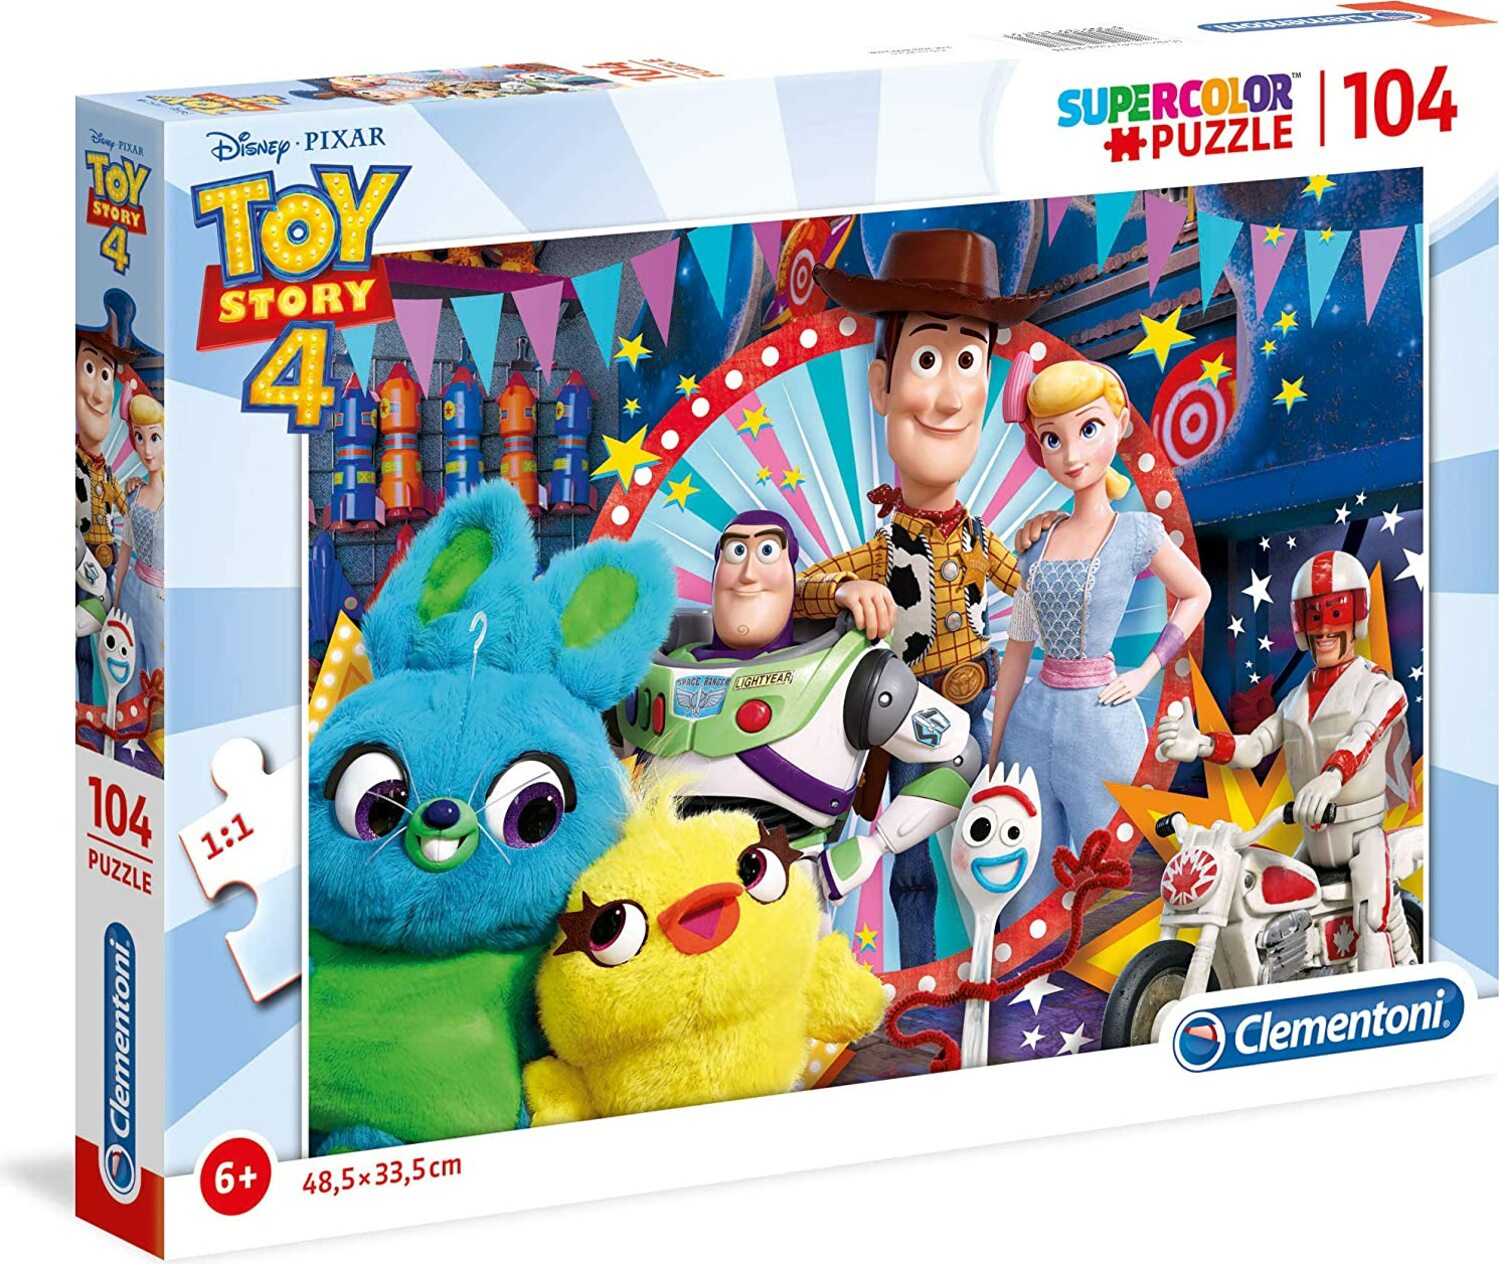 Puzzle Maxi 24, Toy Story 4